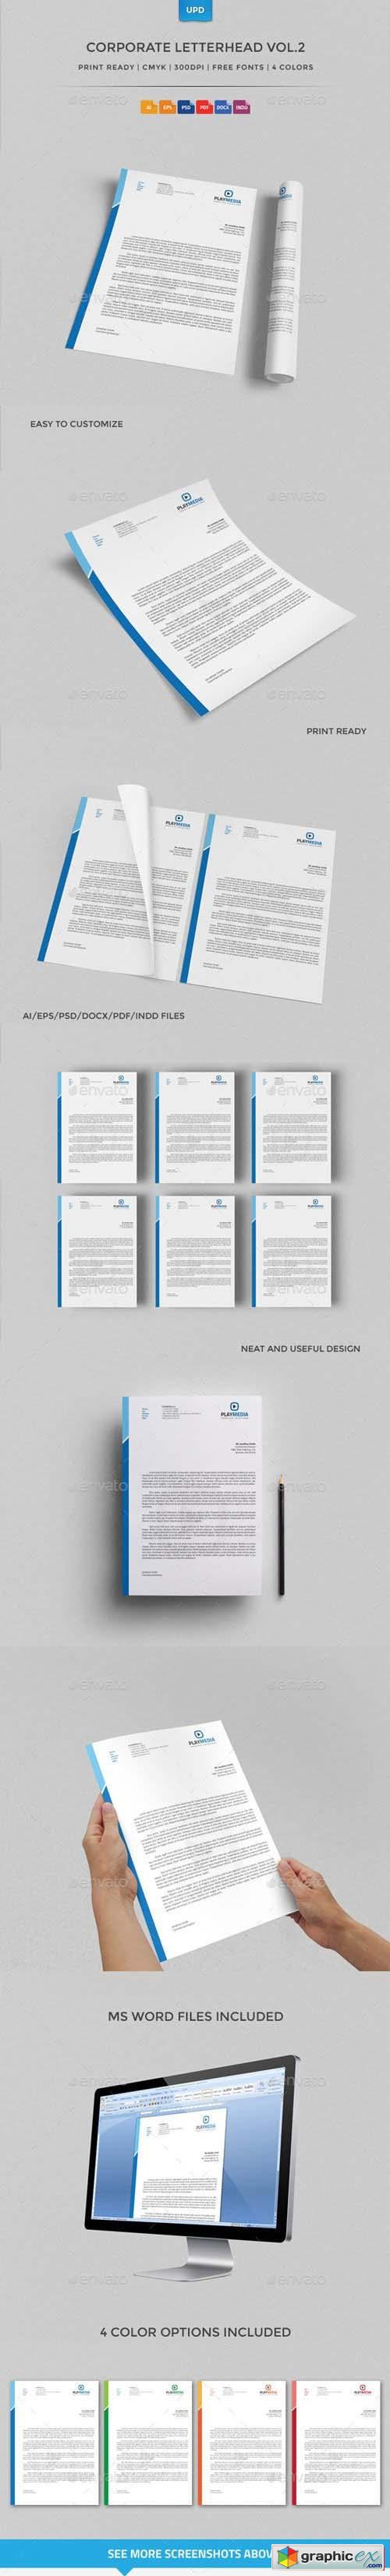 Corporate Letterhead Vol.2 with MS Word Doc 